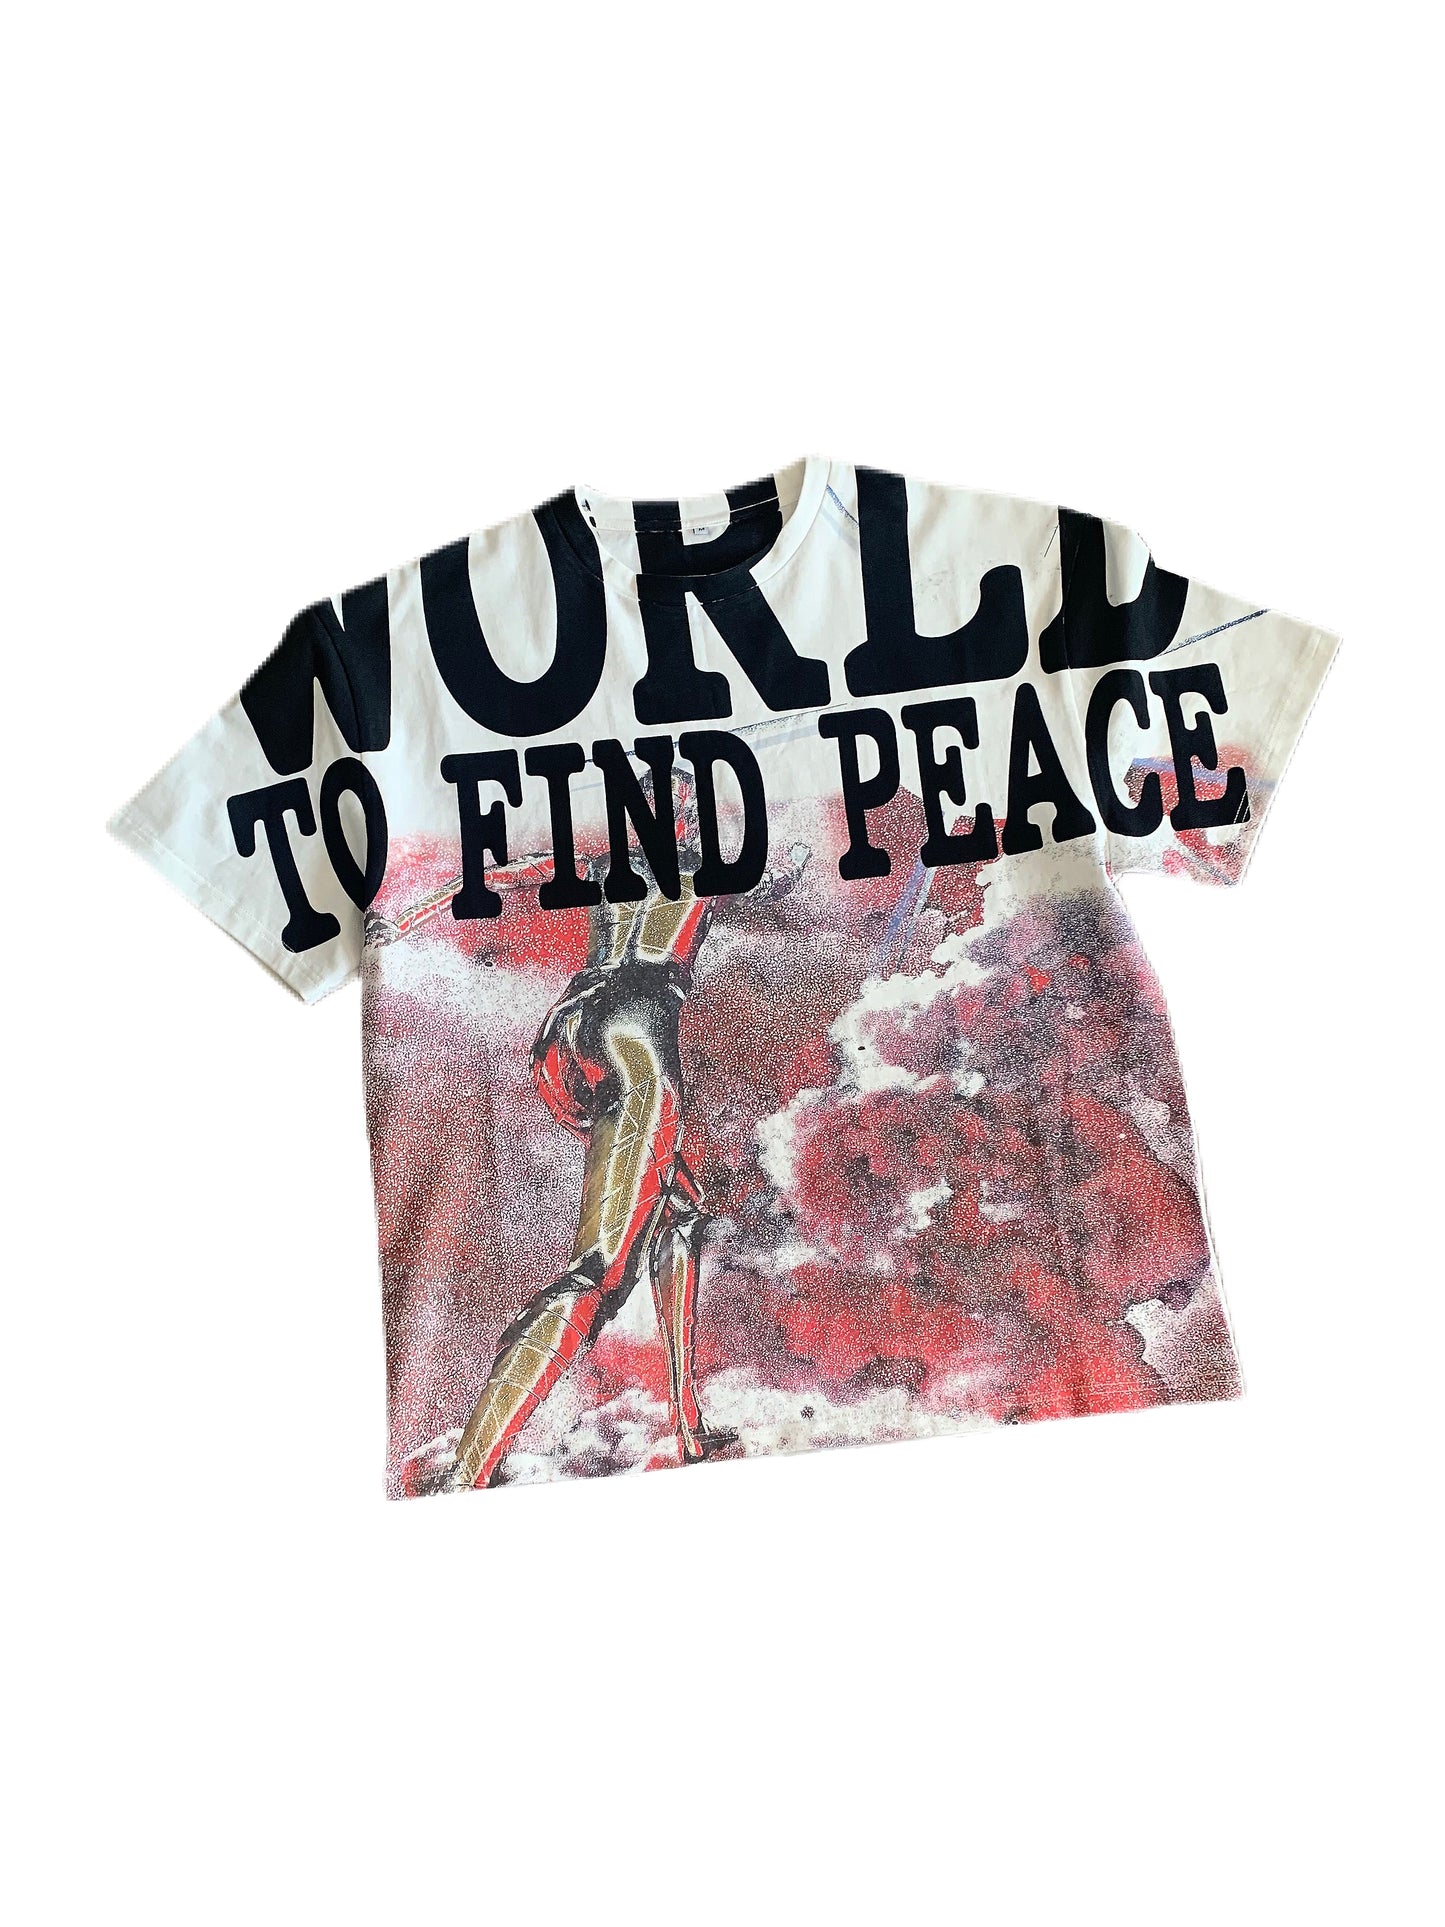 I Left This World To Find Peace Tee